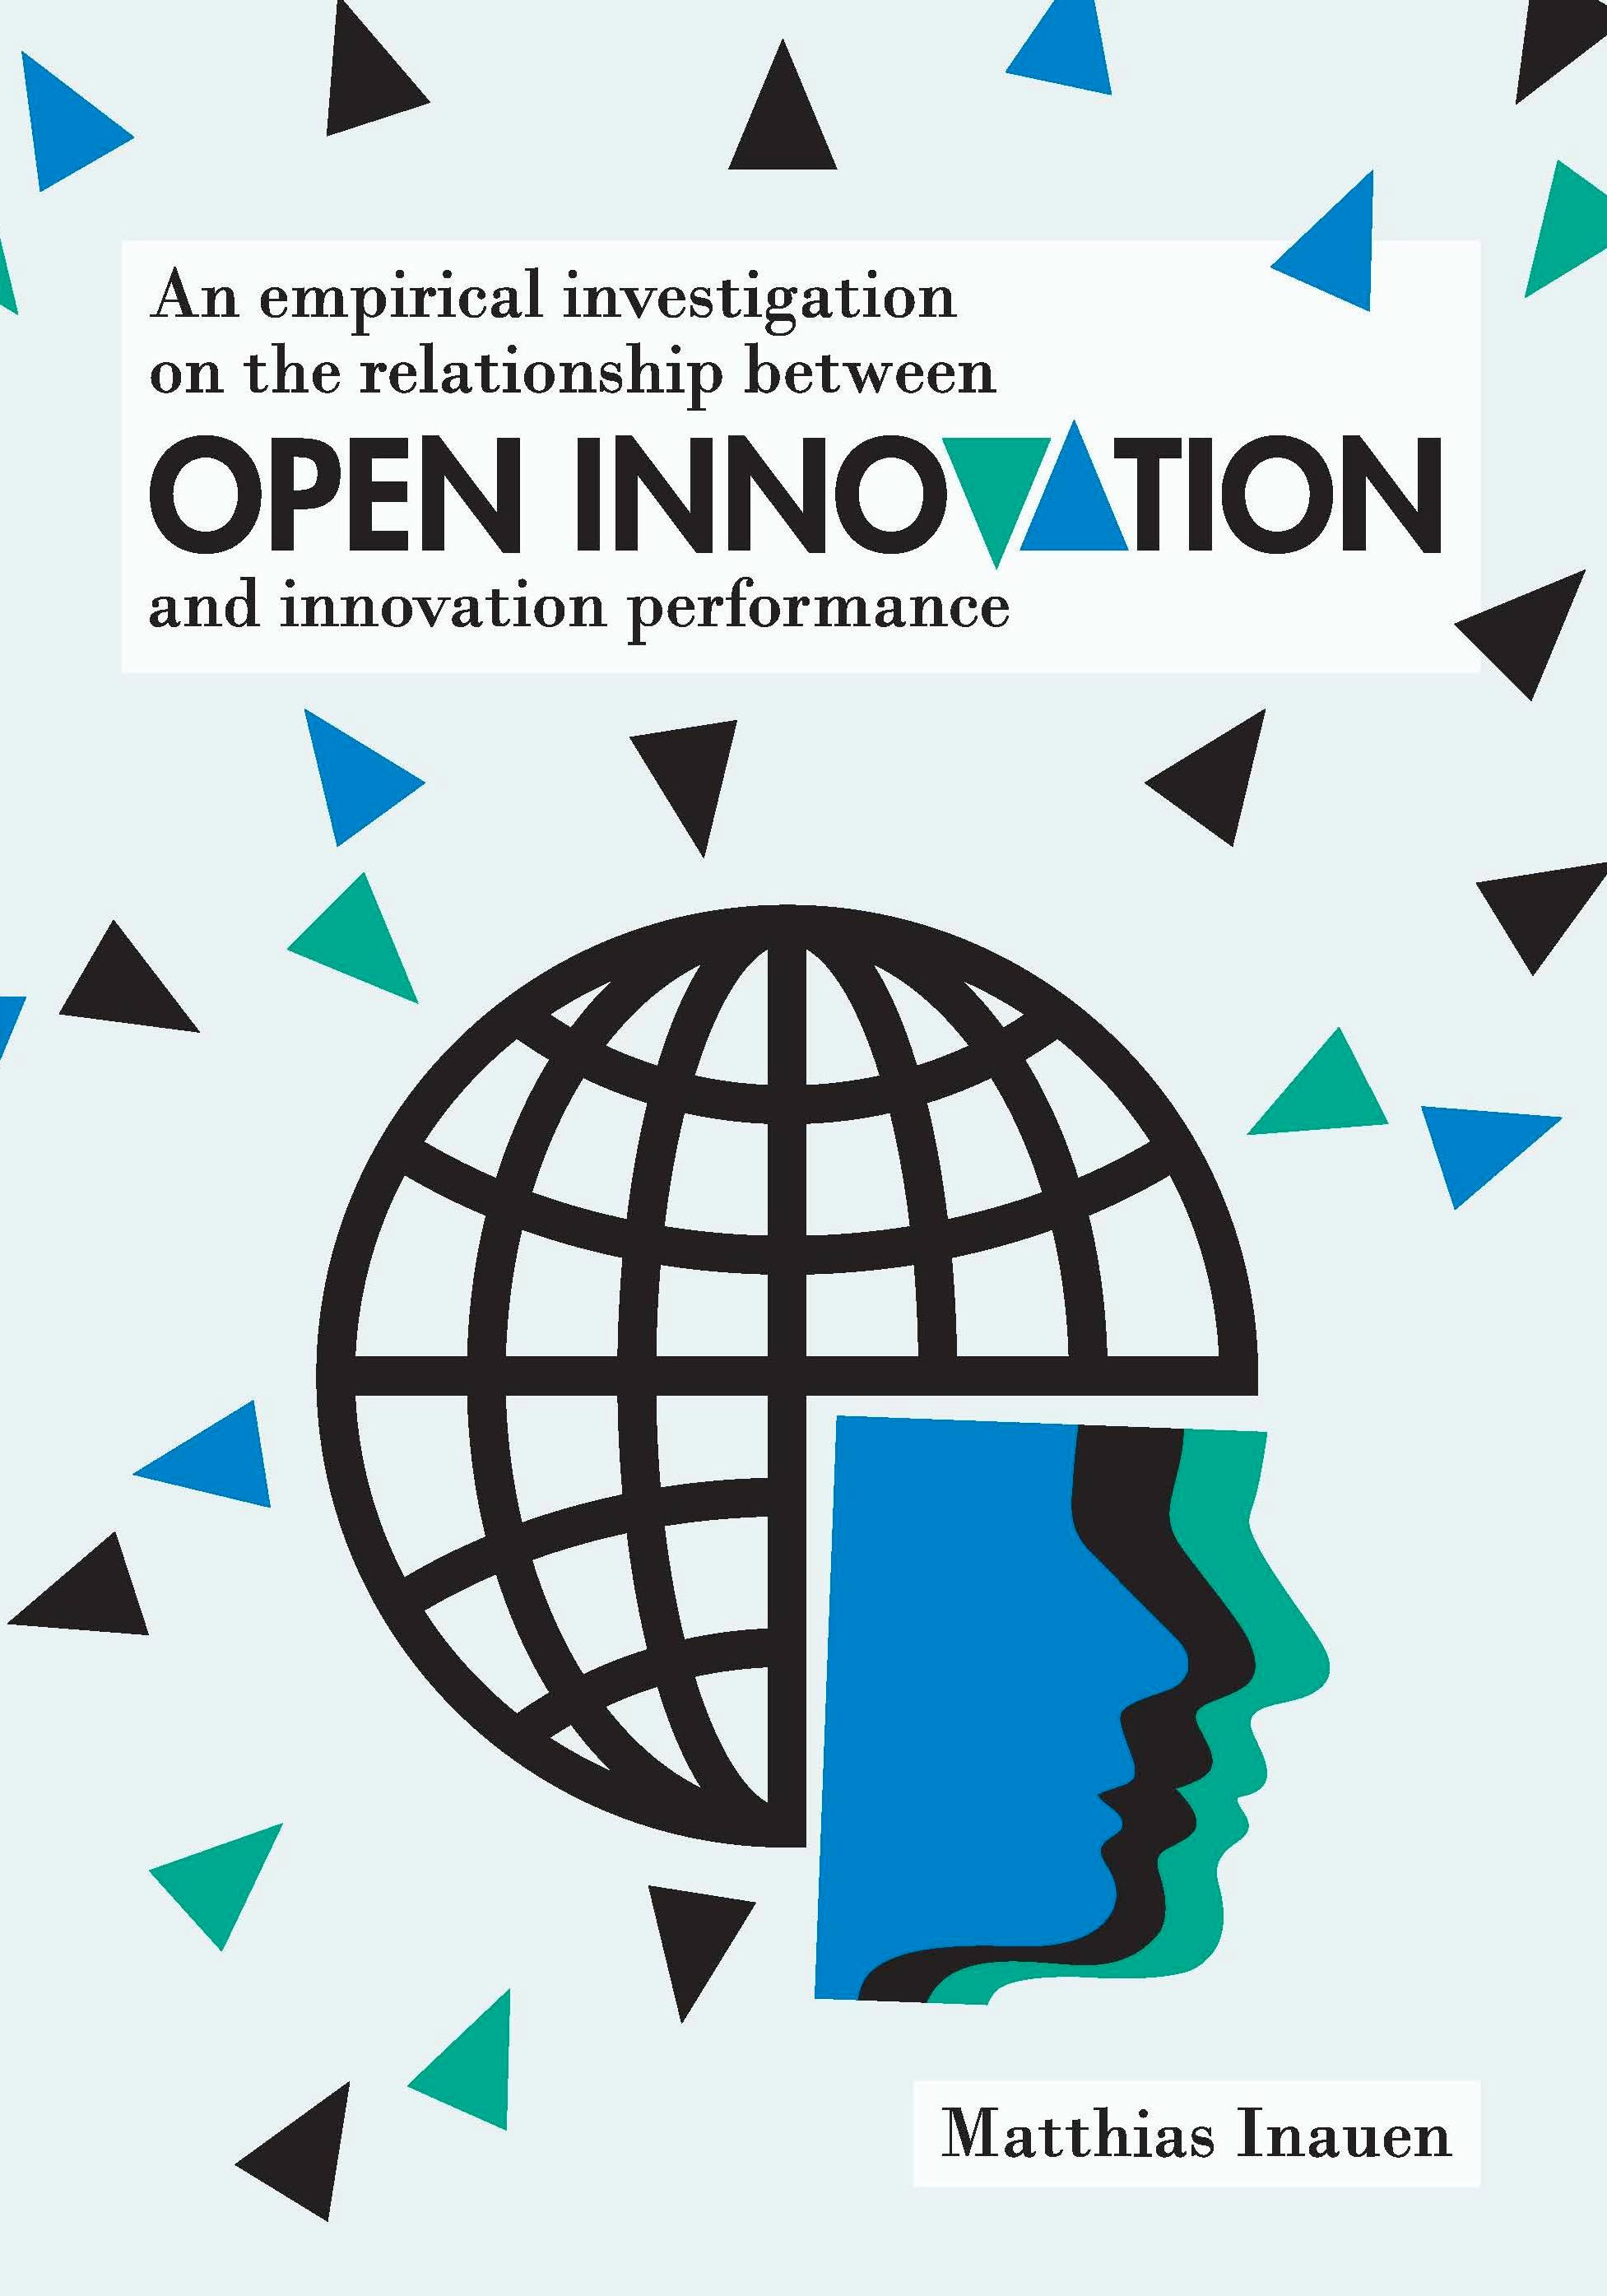 An empirical investigation on the relationship between open innovation and innovation performance - Inauen, Matthias